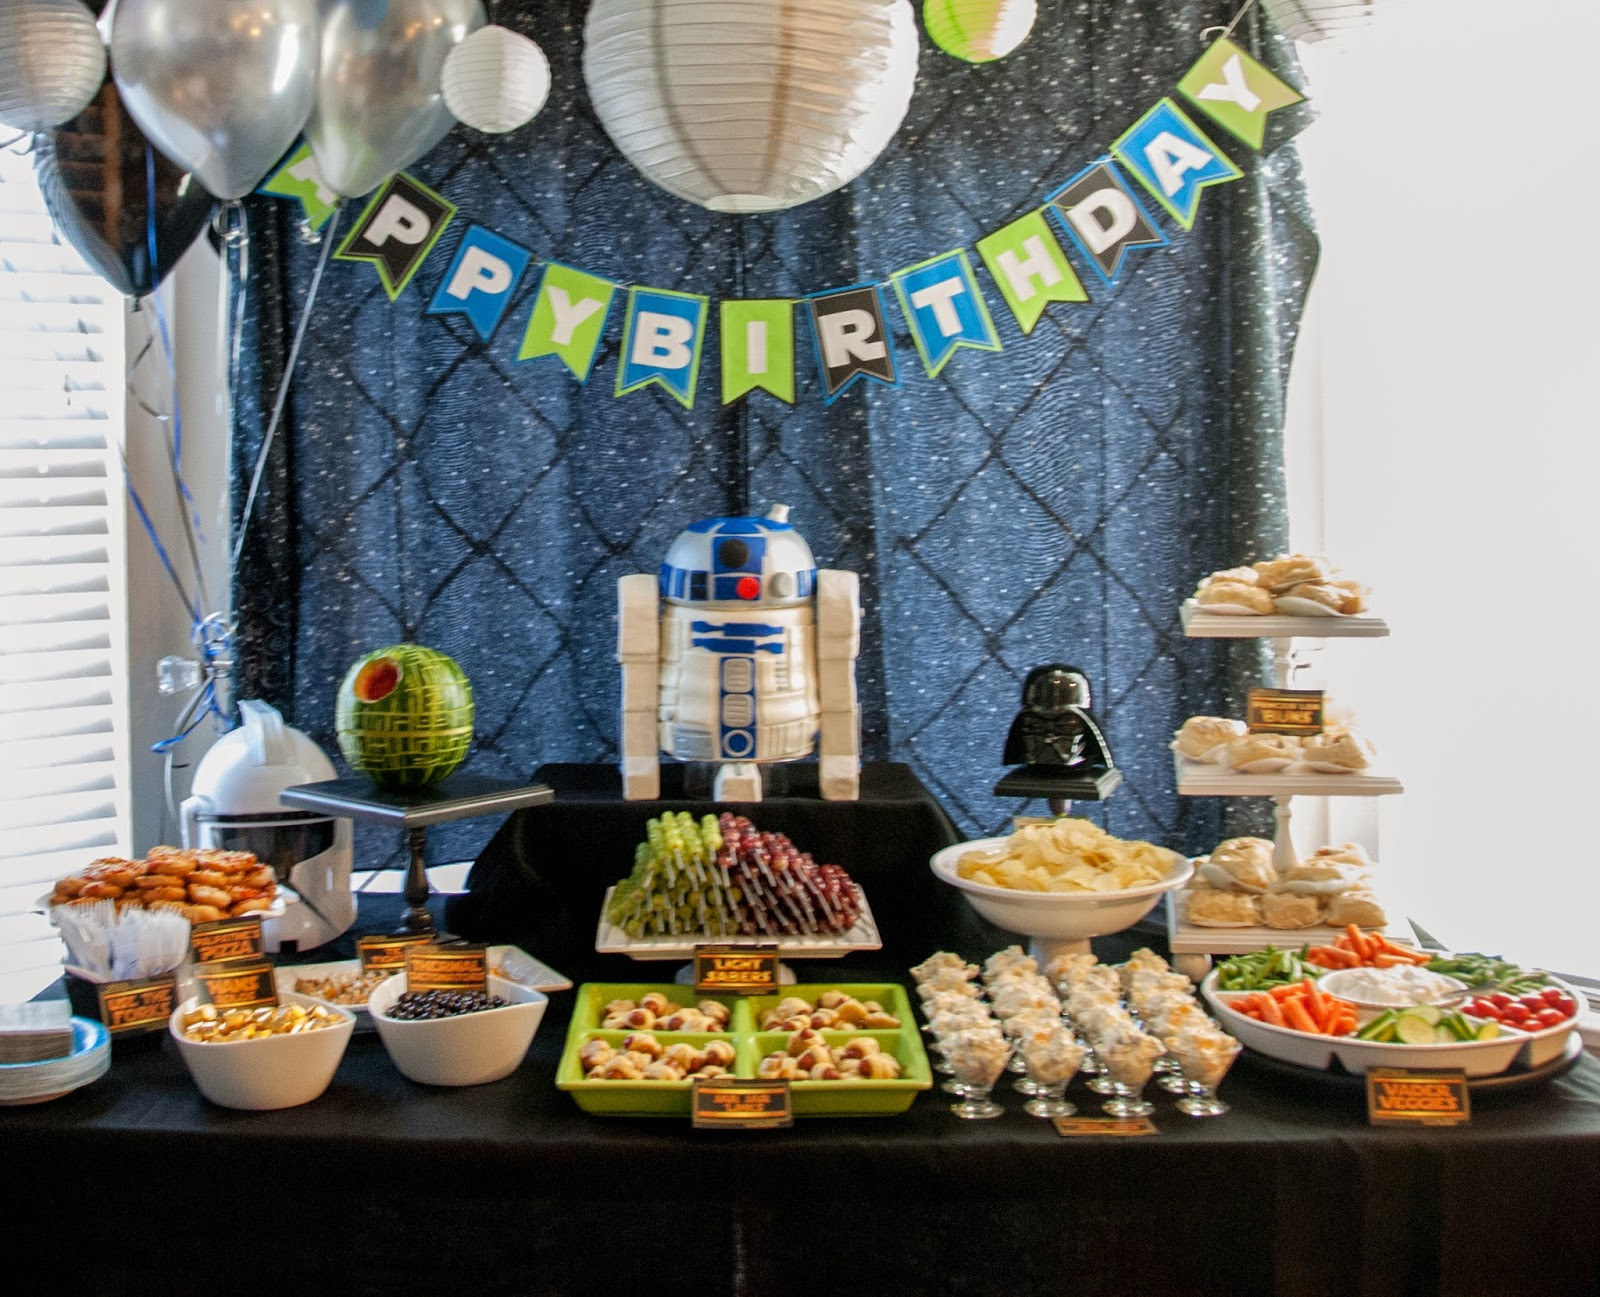 Birthday Party Decorations Adults
 Author Robin King Blog Star Wars Party with R2D2 Cake